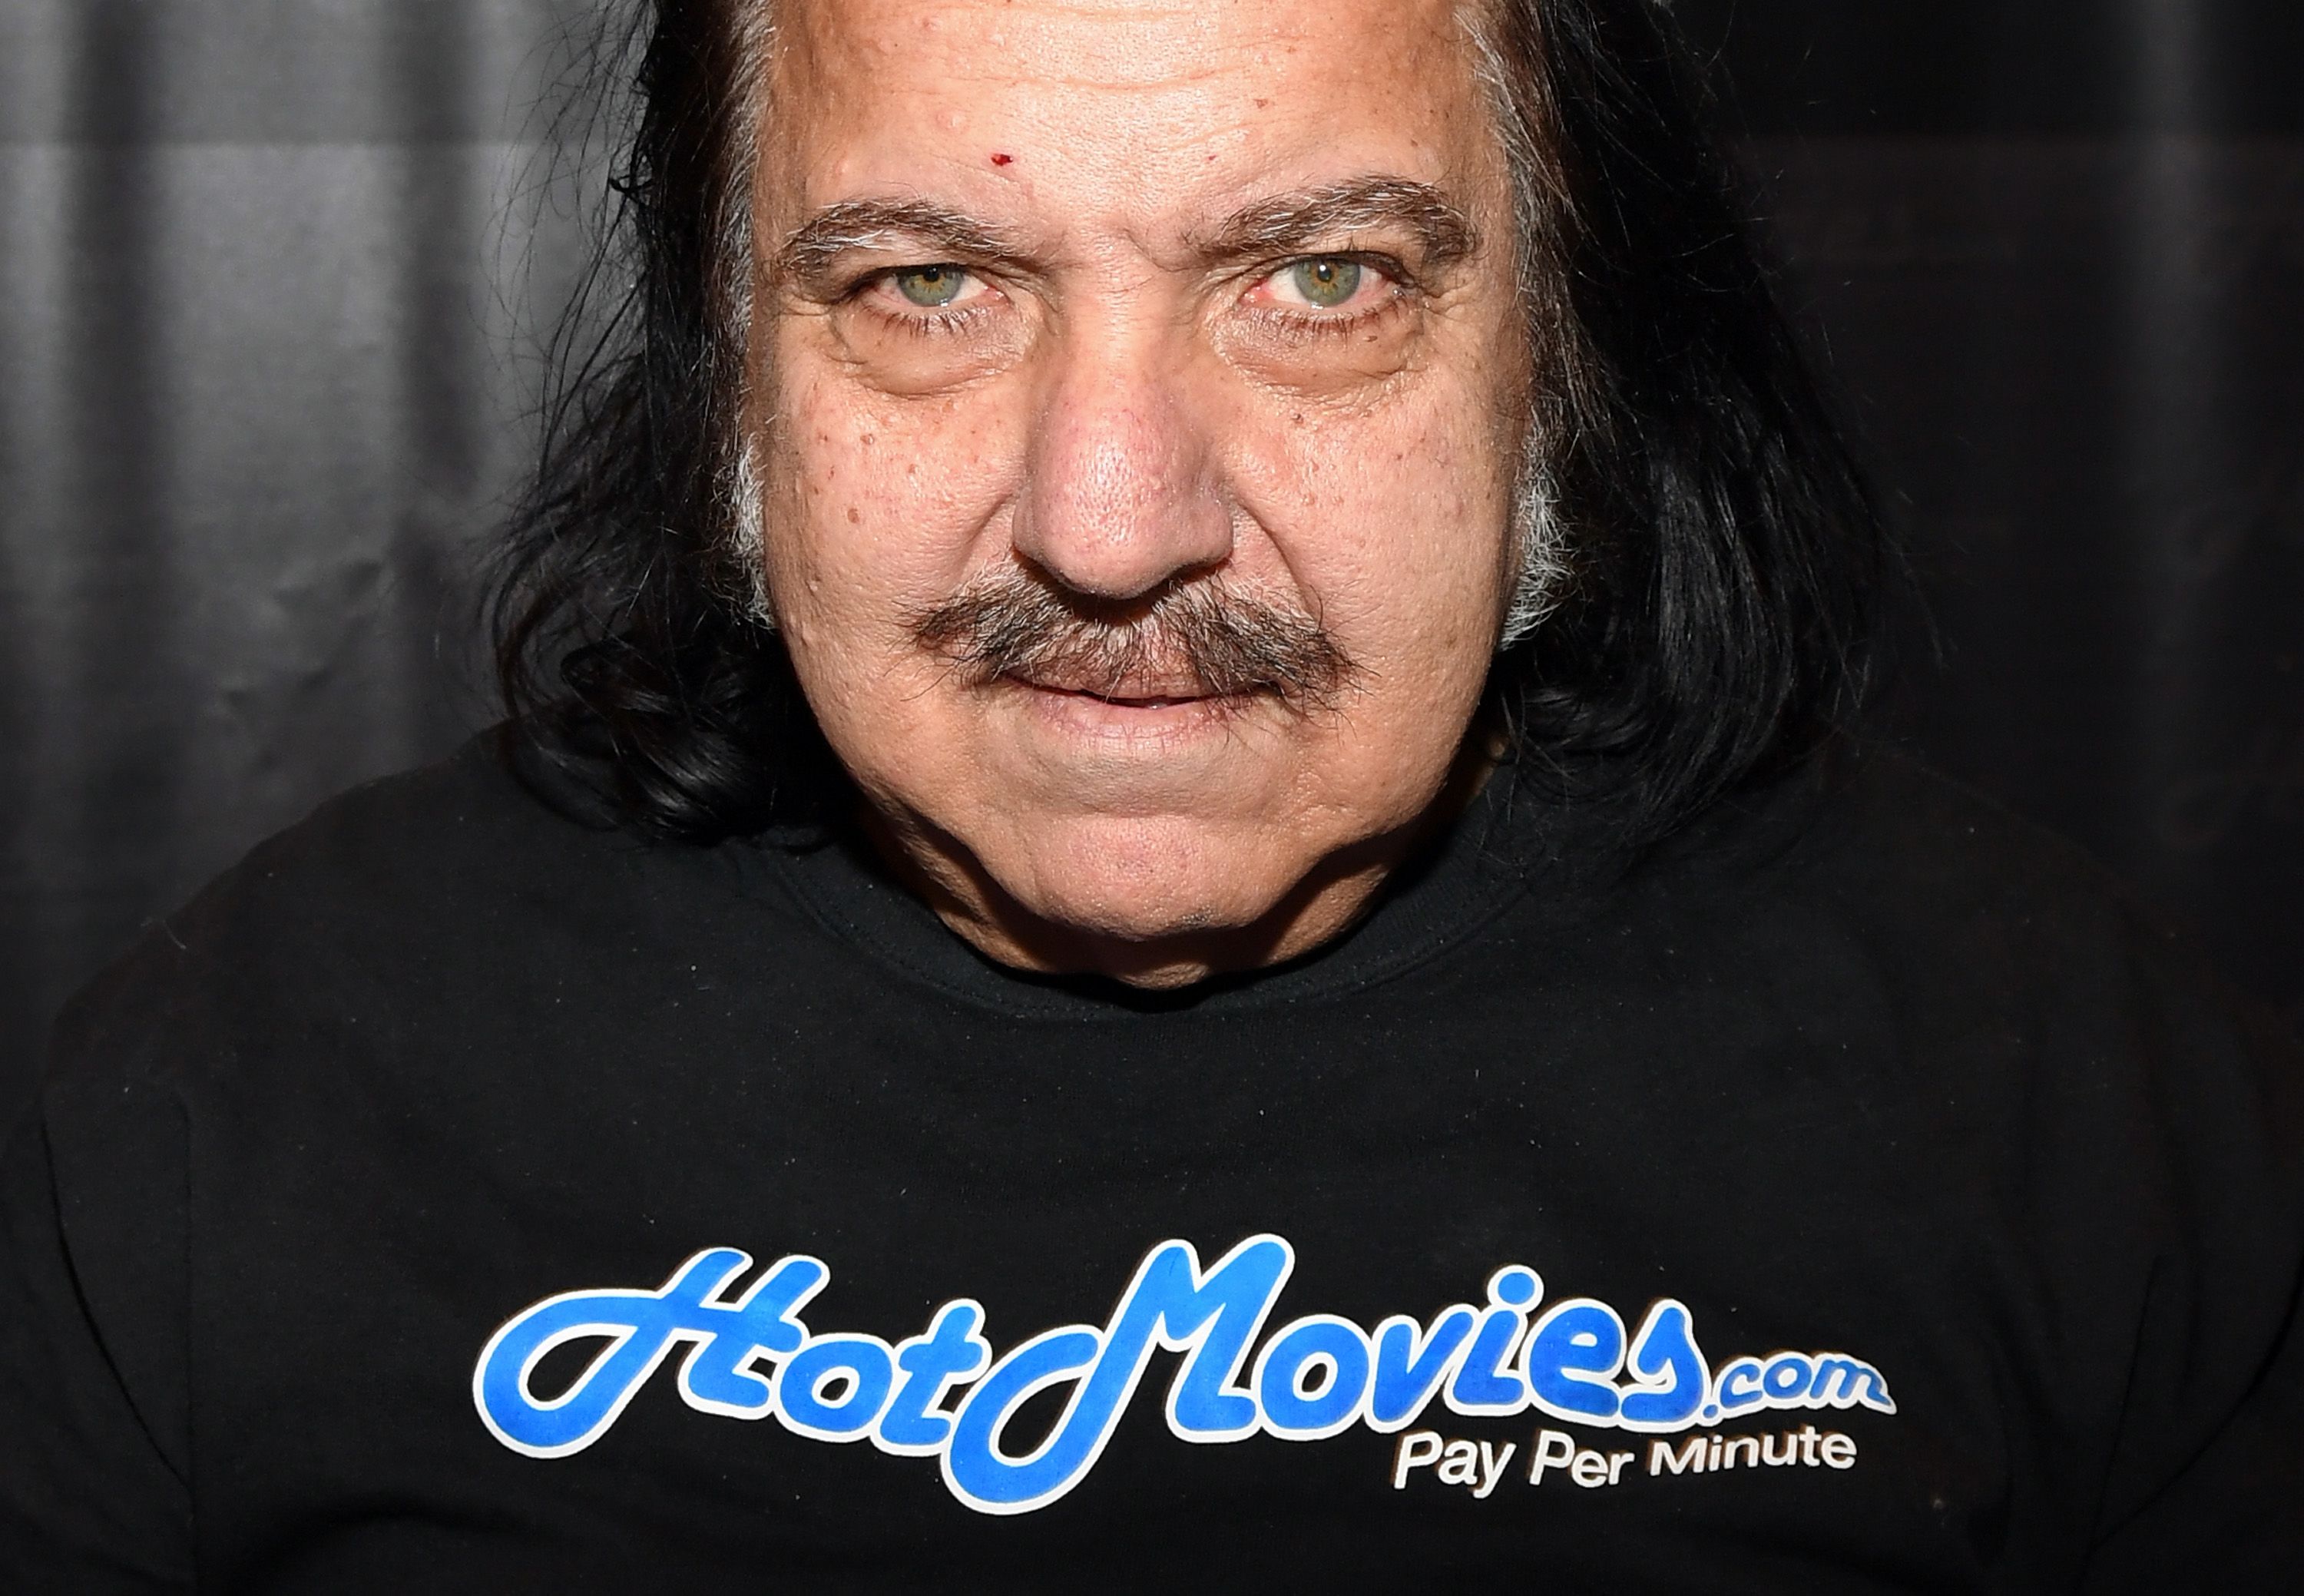 debi orr recommends images of ron jeremy pic